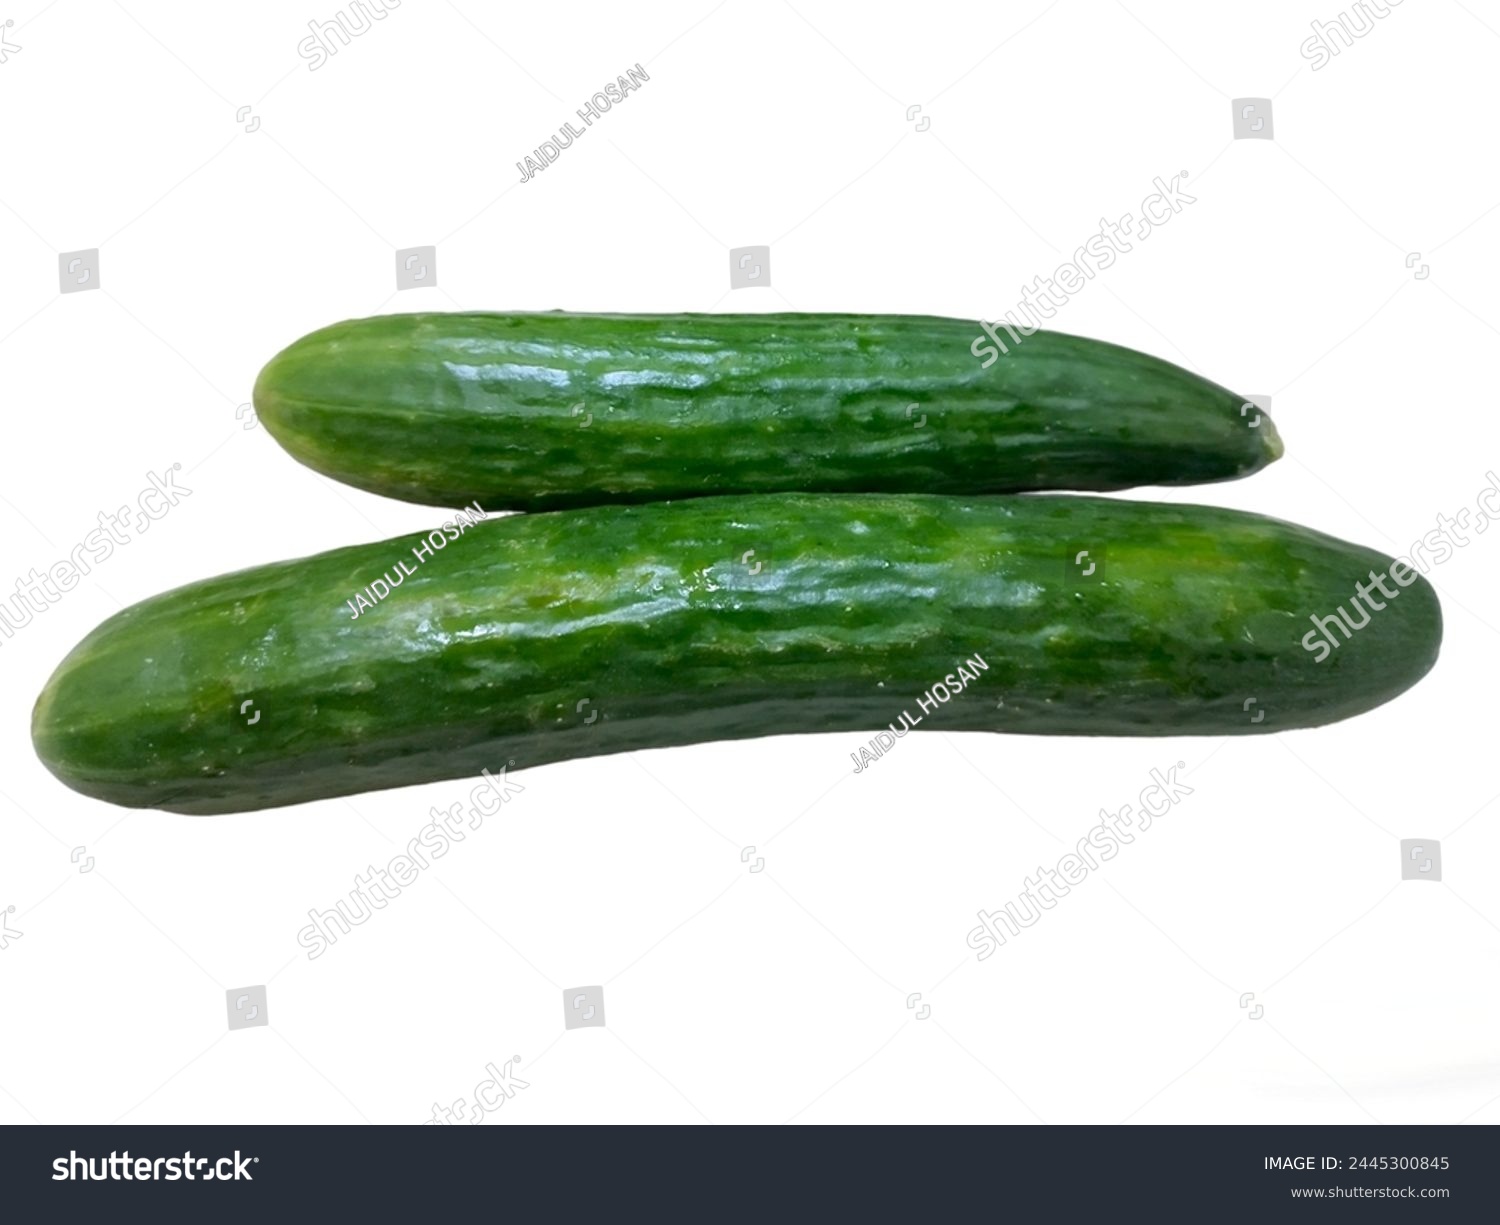 cucumbers (burpless, seedless, hothouse, gourmet, greenhouse or cucumber) isolated on white background. #2445300845